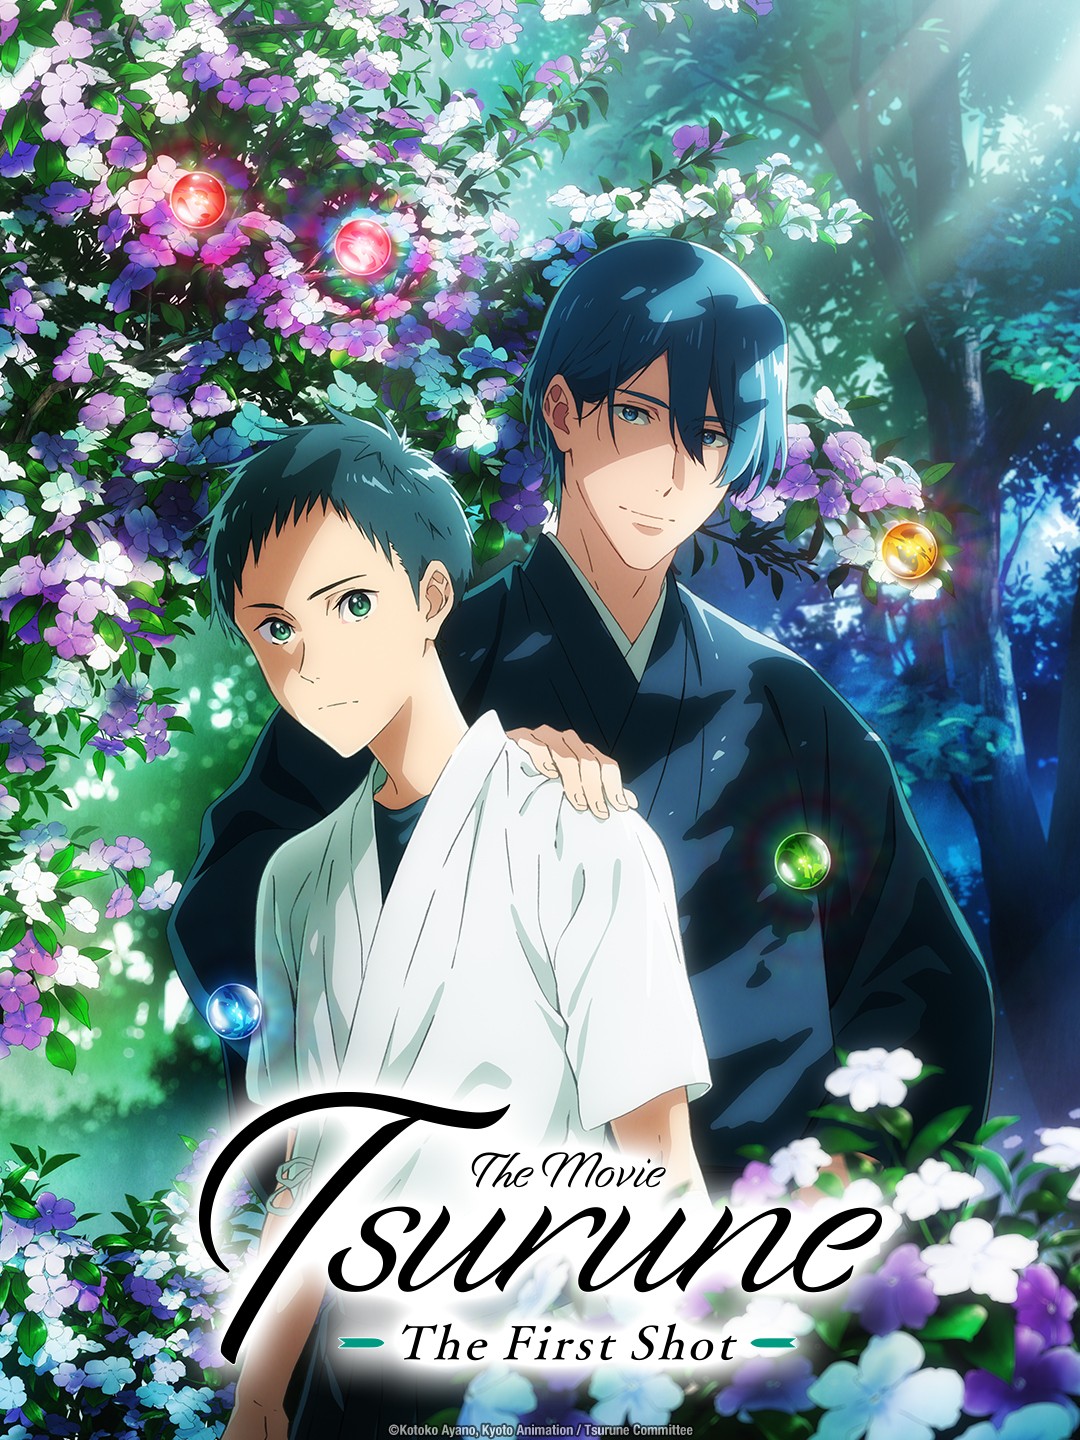 REVIEW: Tsurune - The Linking Shot - Is One of the Best of the Season